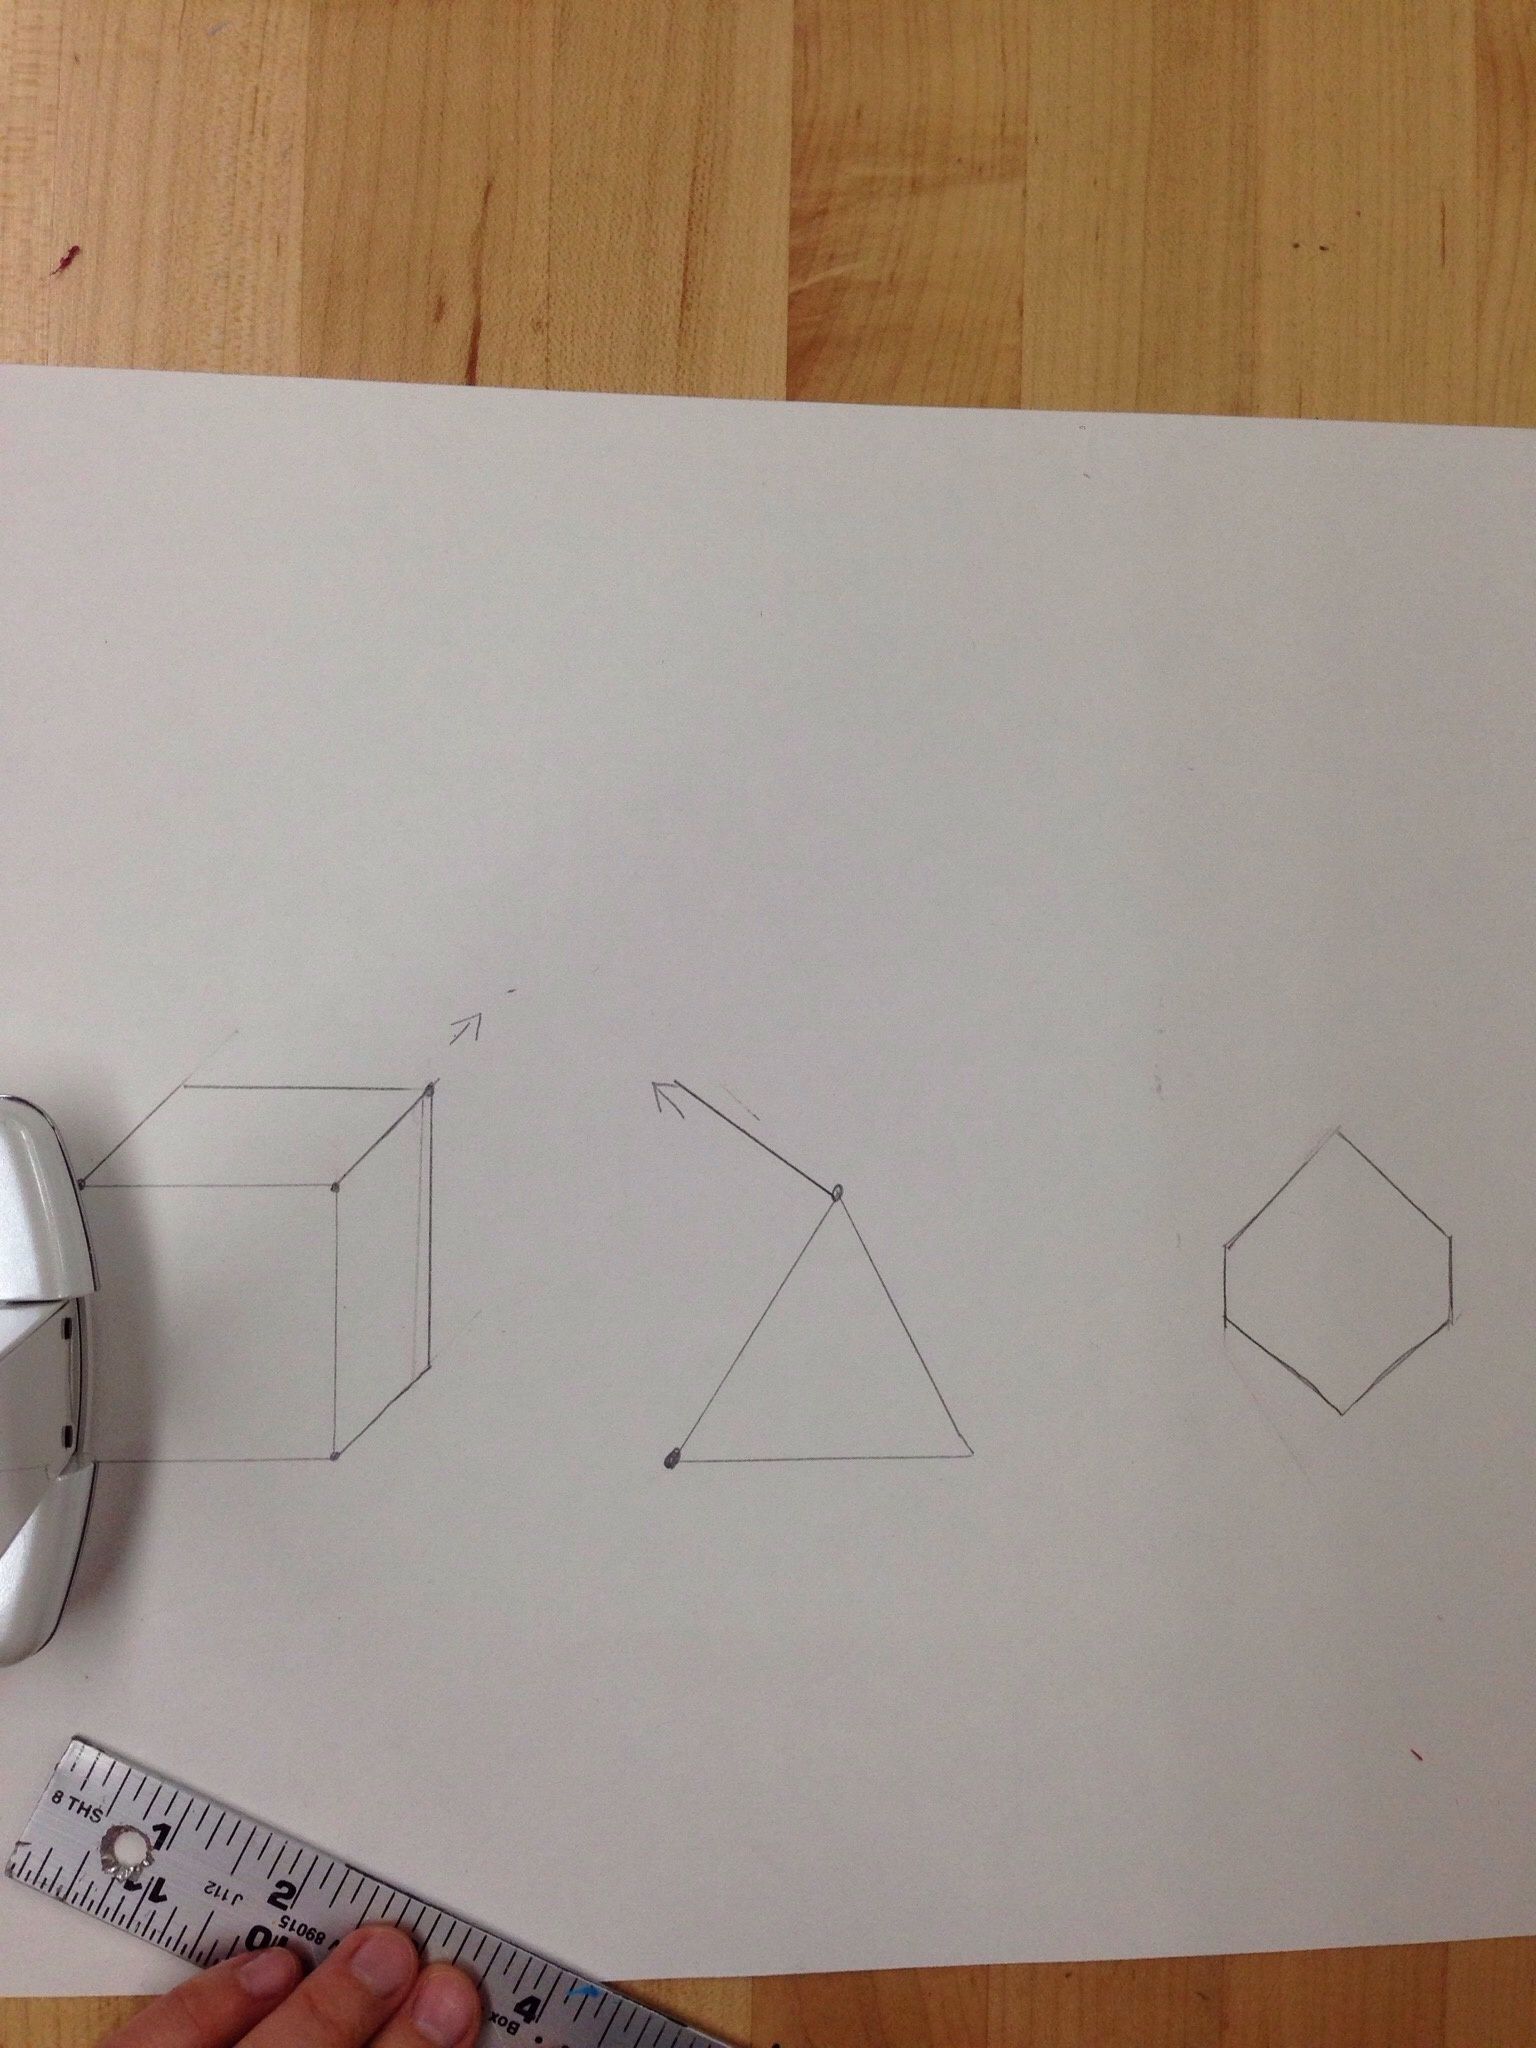 2 dimensional shapes drawing